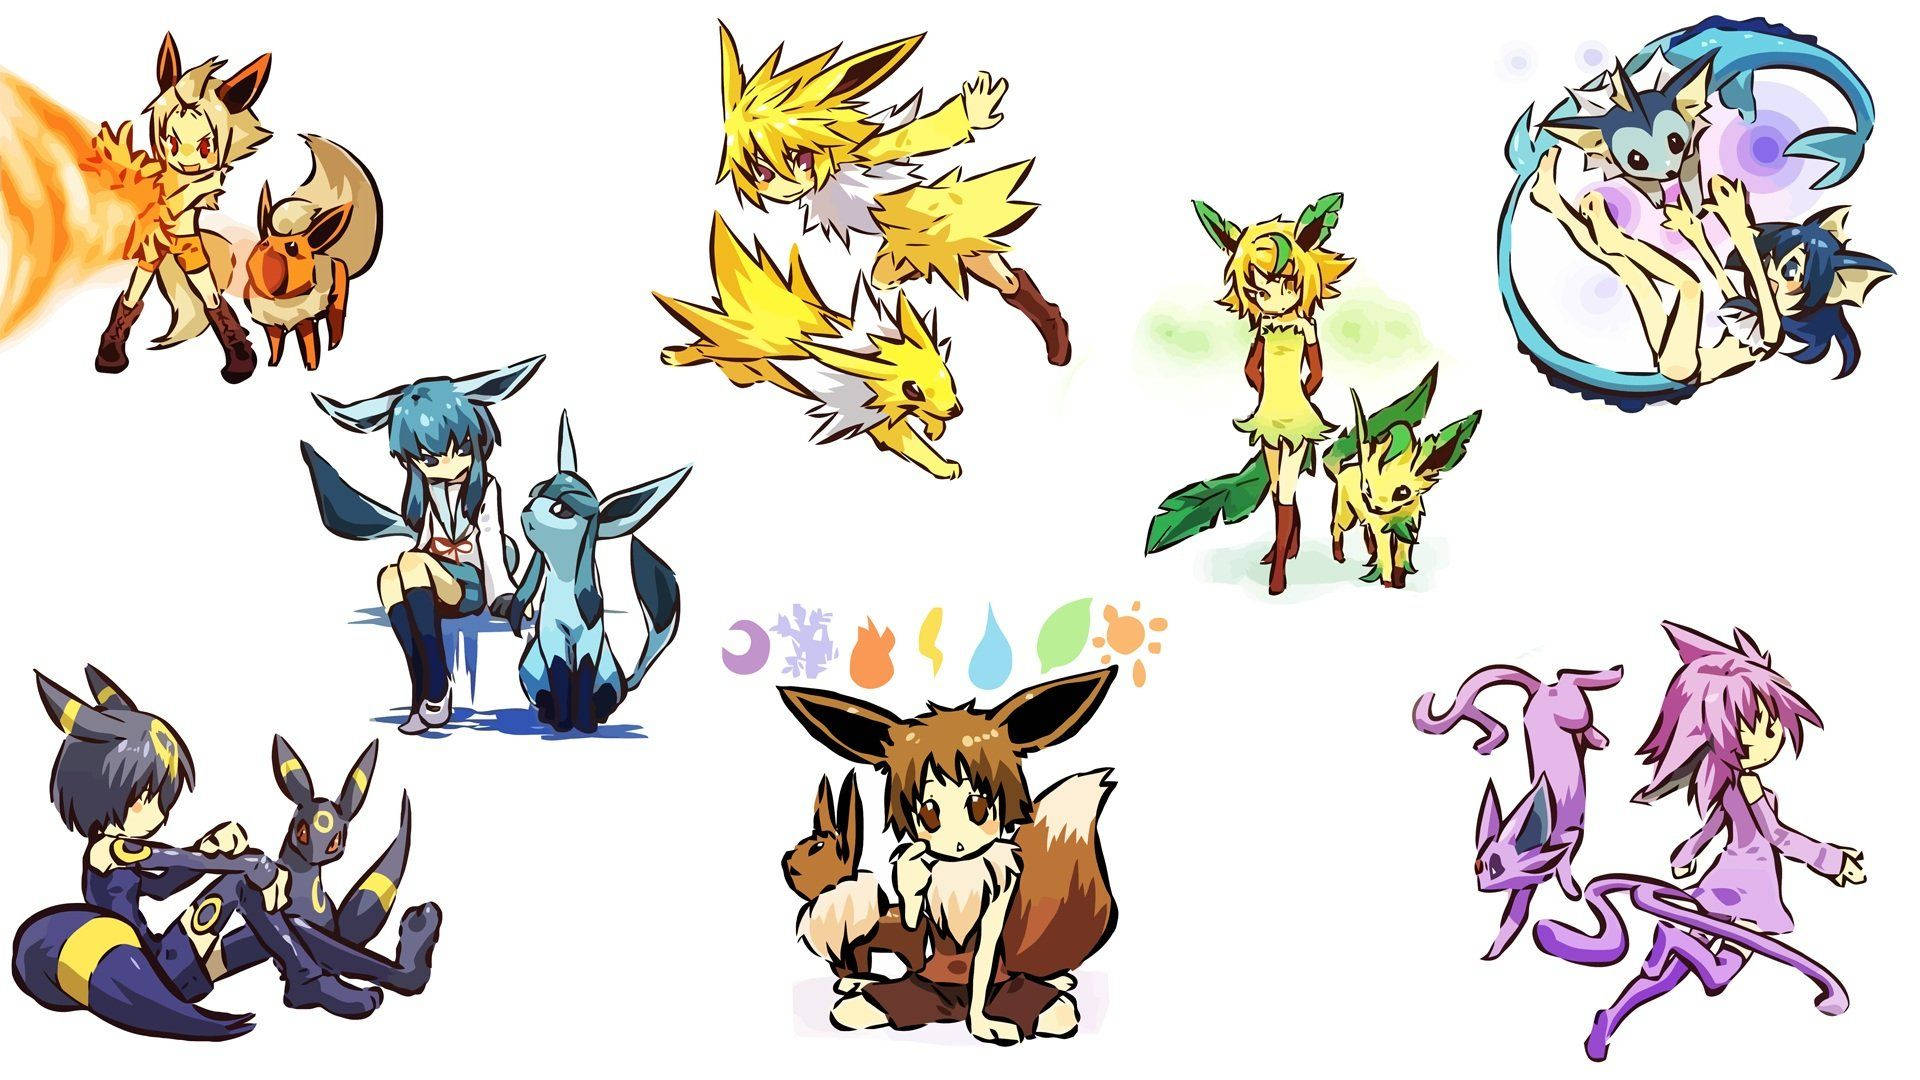 “Take your pick from the 8 Eevee Evolutions' Human Versions” Wallpaper